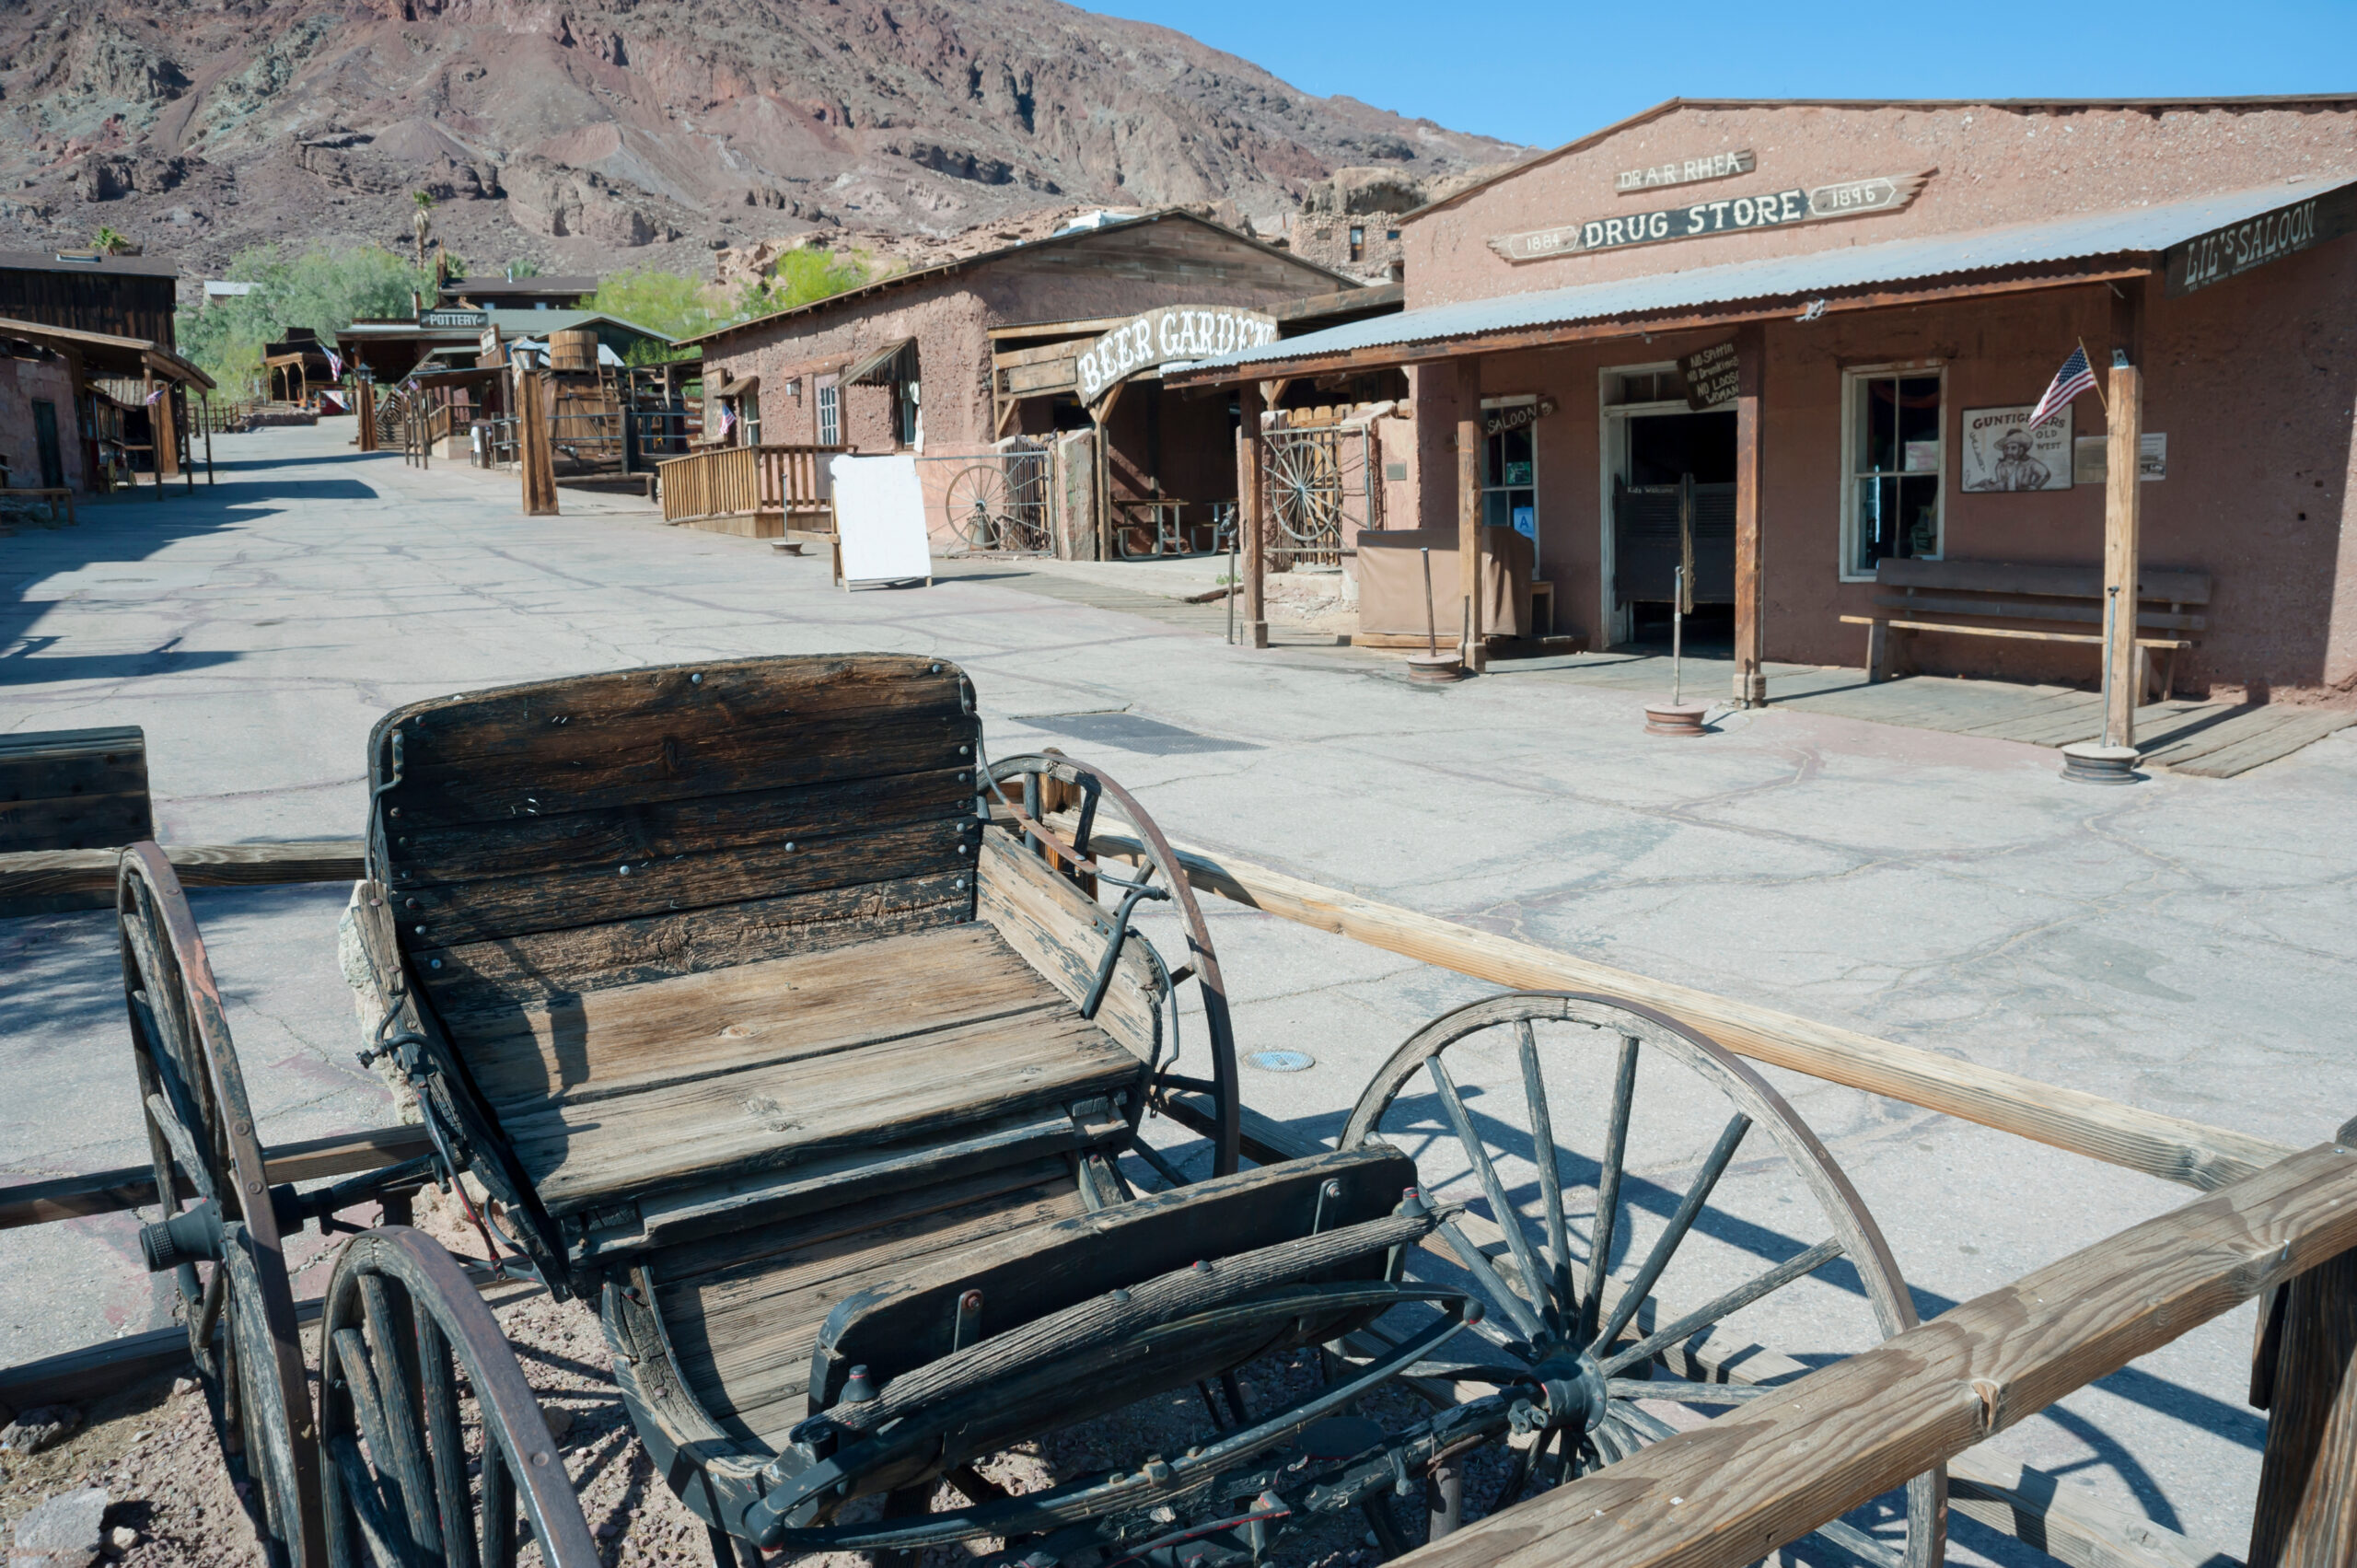 CALICO GHOST TOWN, CALIFORNIA - MAY 28: View of Calico Ghost Town, California, San Bernardino County Park on May 28, 2015.